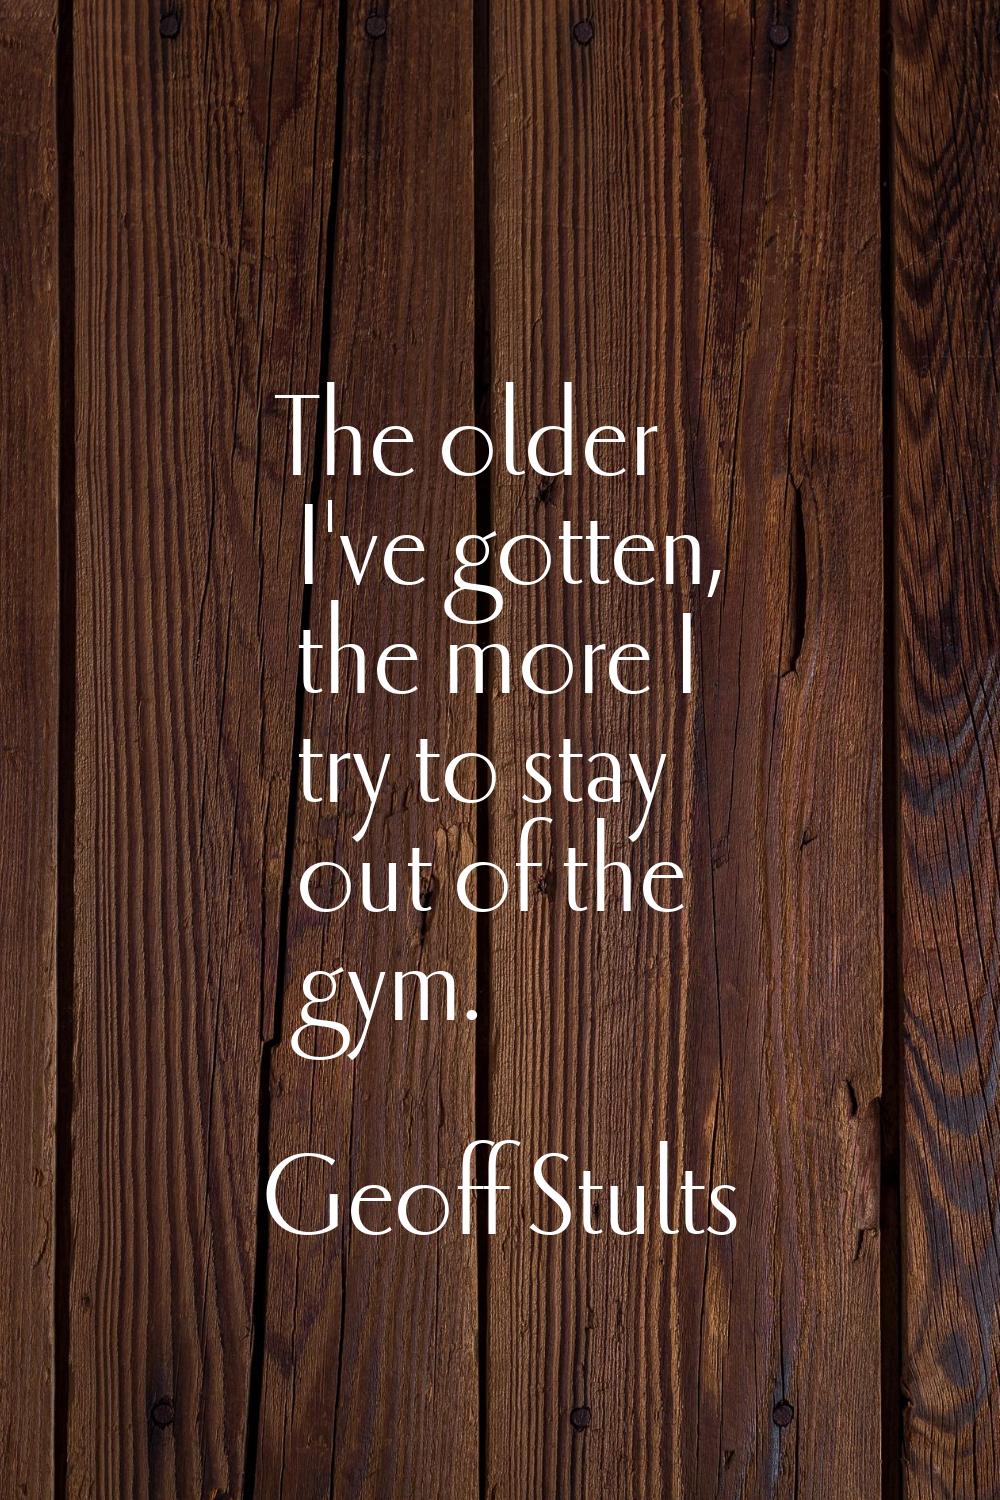 The older I've gotten, the more I try to stay out of the gym.